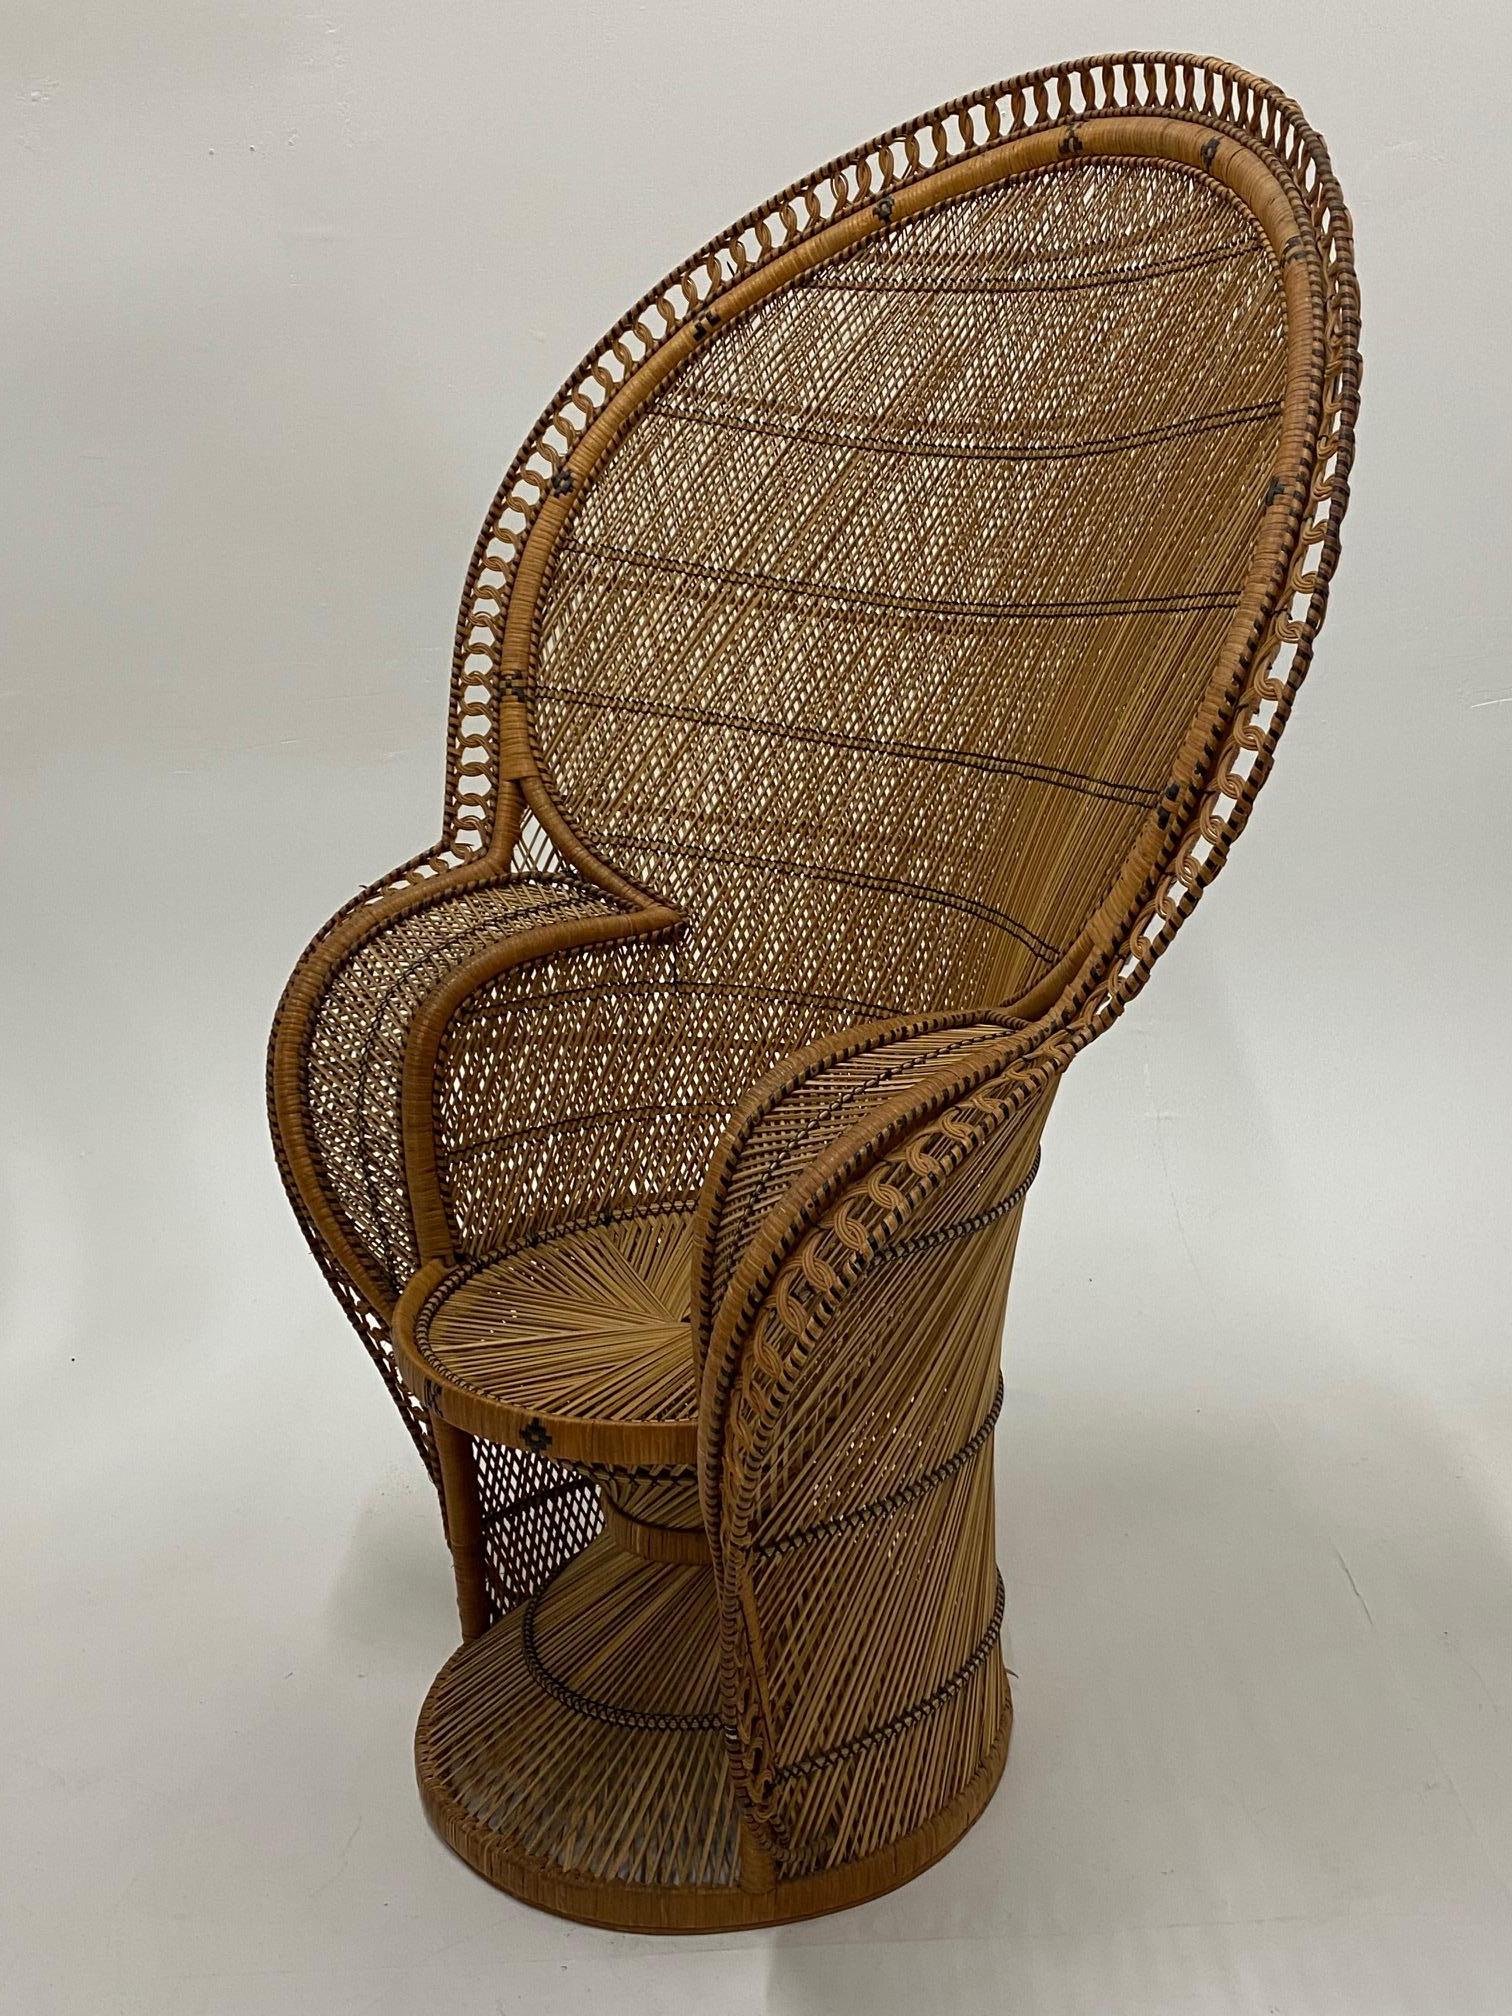 Philippine Incredibly Detailed Impressive in Scale Rattan Cobra Peacock Chair